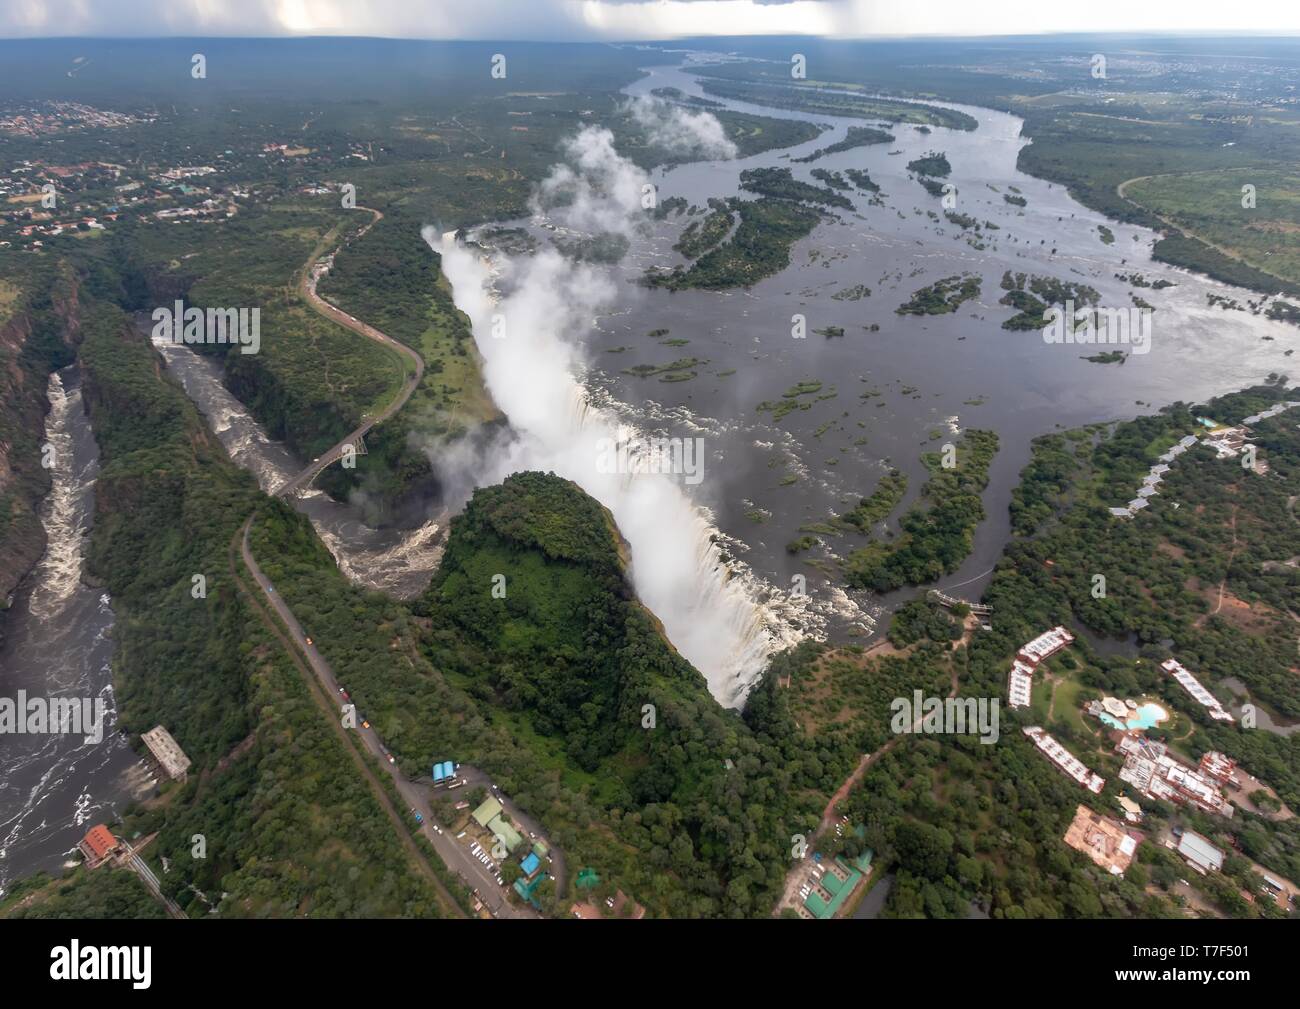 Aerial picture of the famous Victoria Falls between Zambia and Zimbabwe Stock Photo